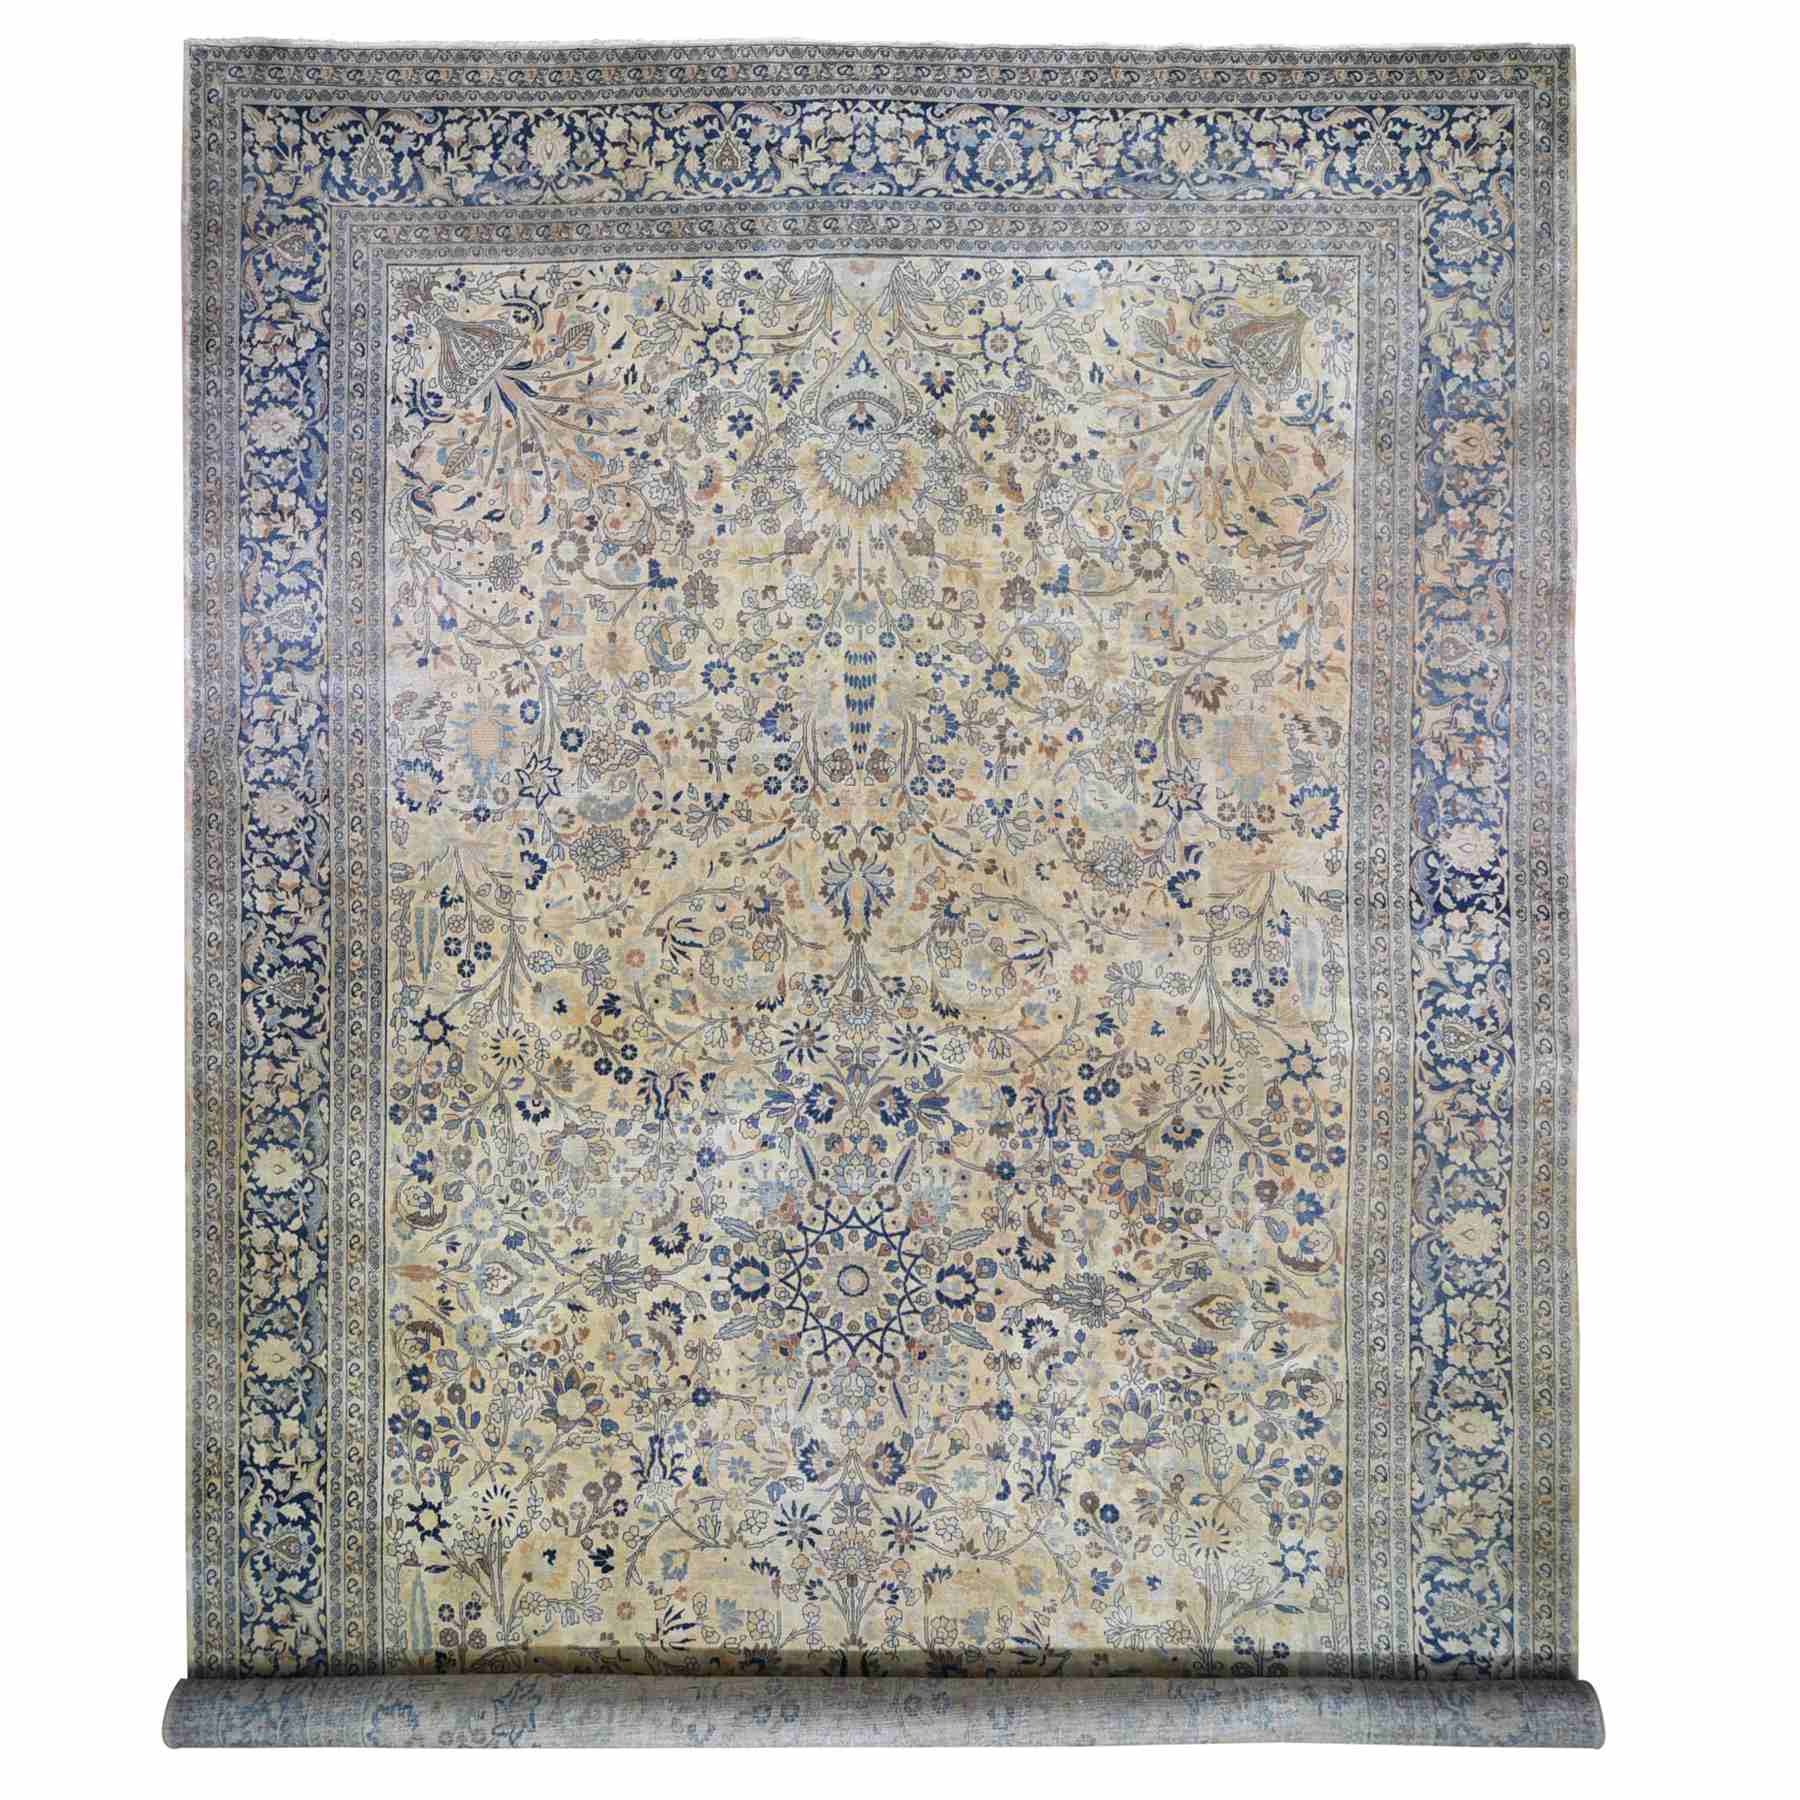 Antique-Hand-Knotted-Rug-296525